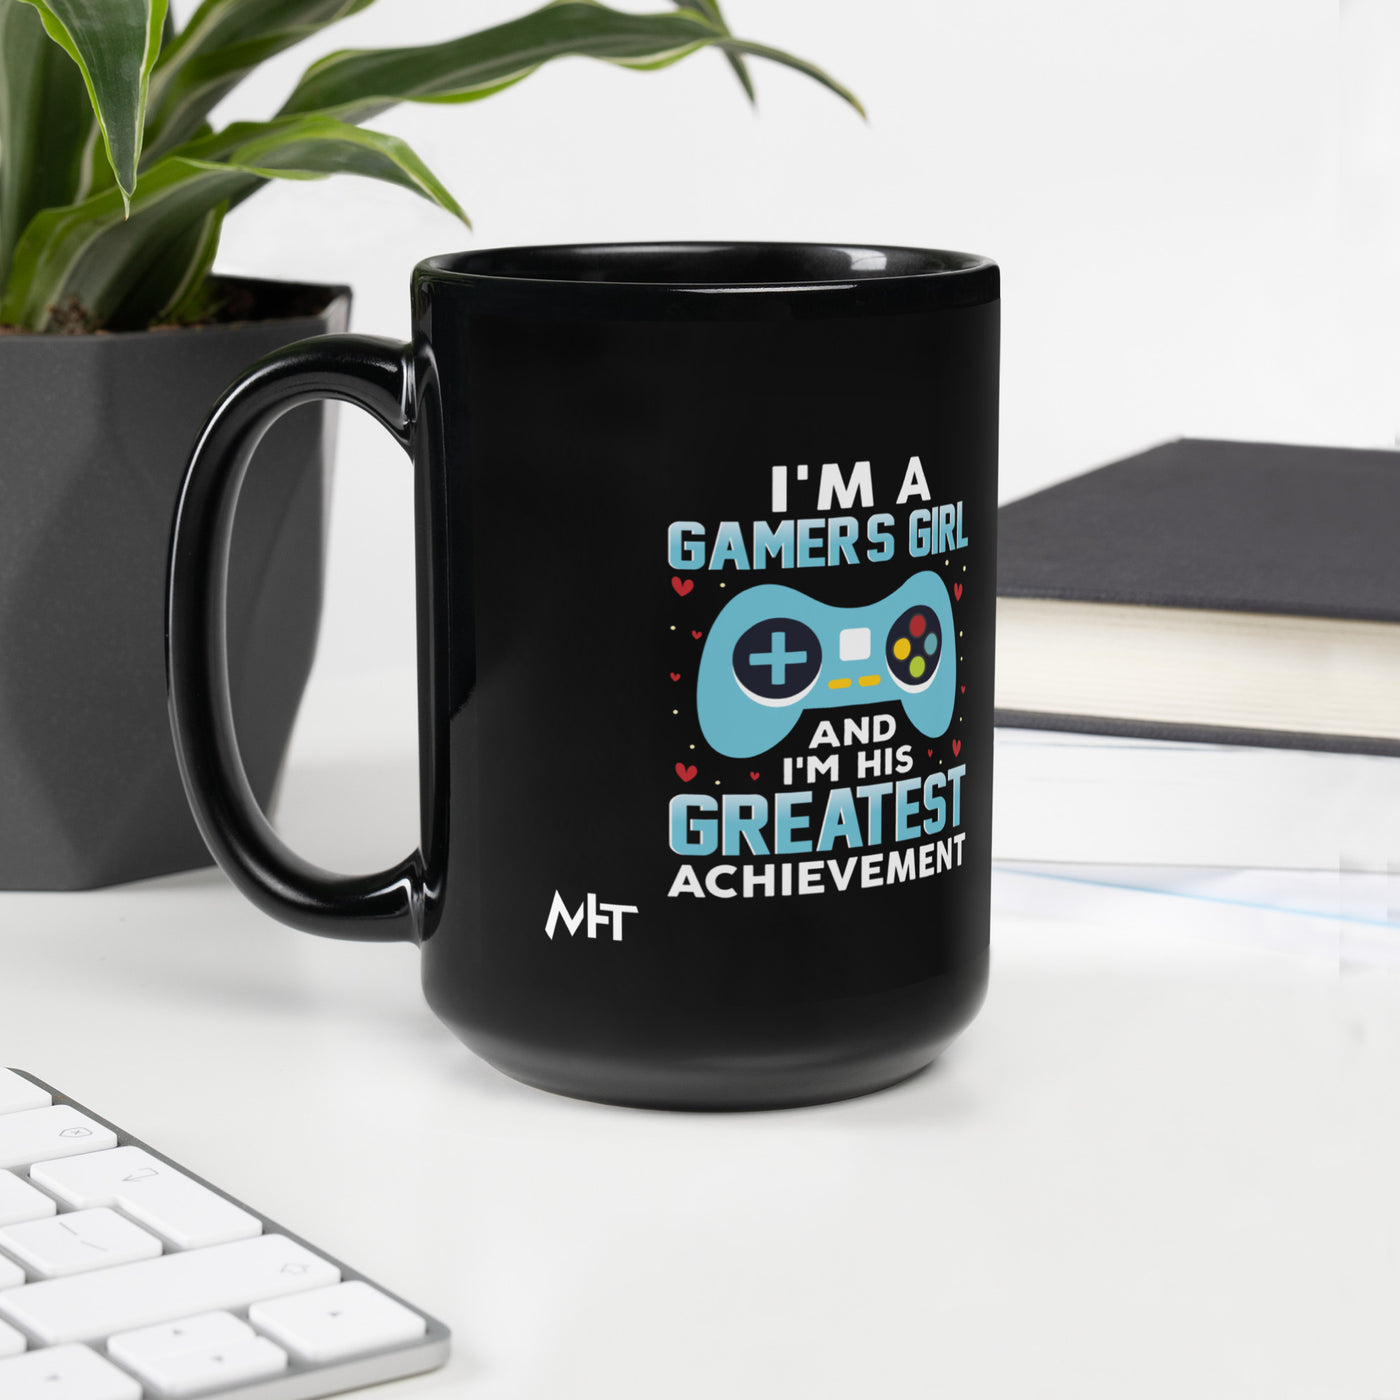 I am a Gamer's Girl, I am his Greatest Achievement (turquoise text ) - Black Glossy Mug